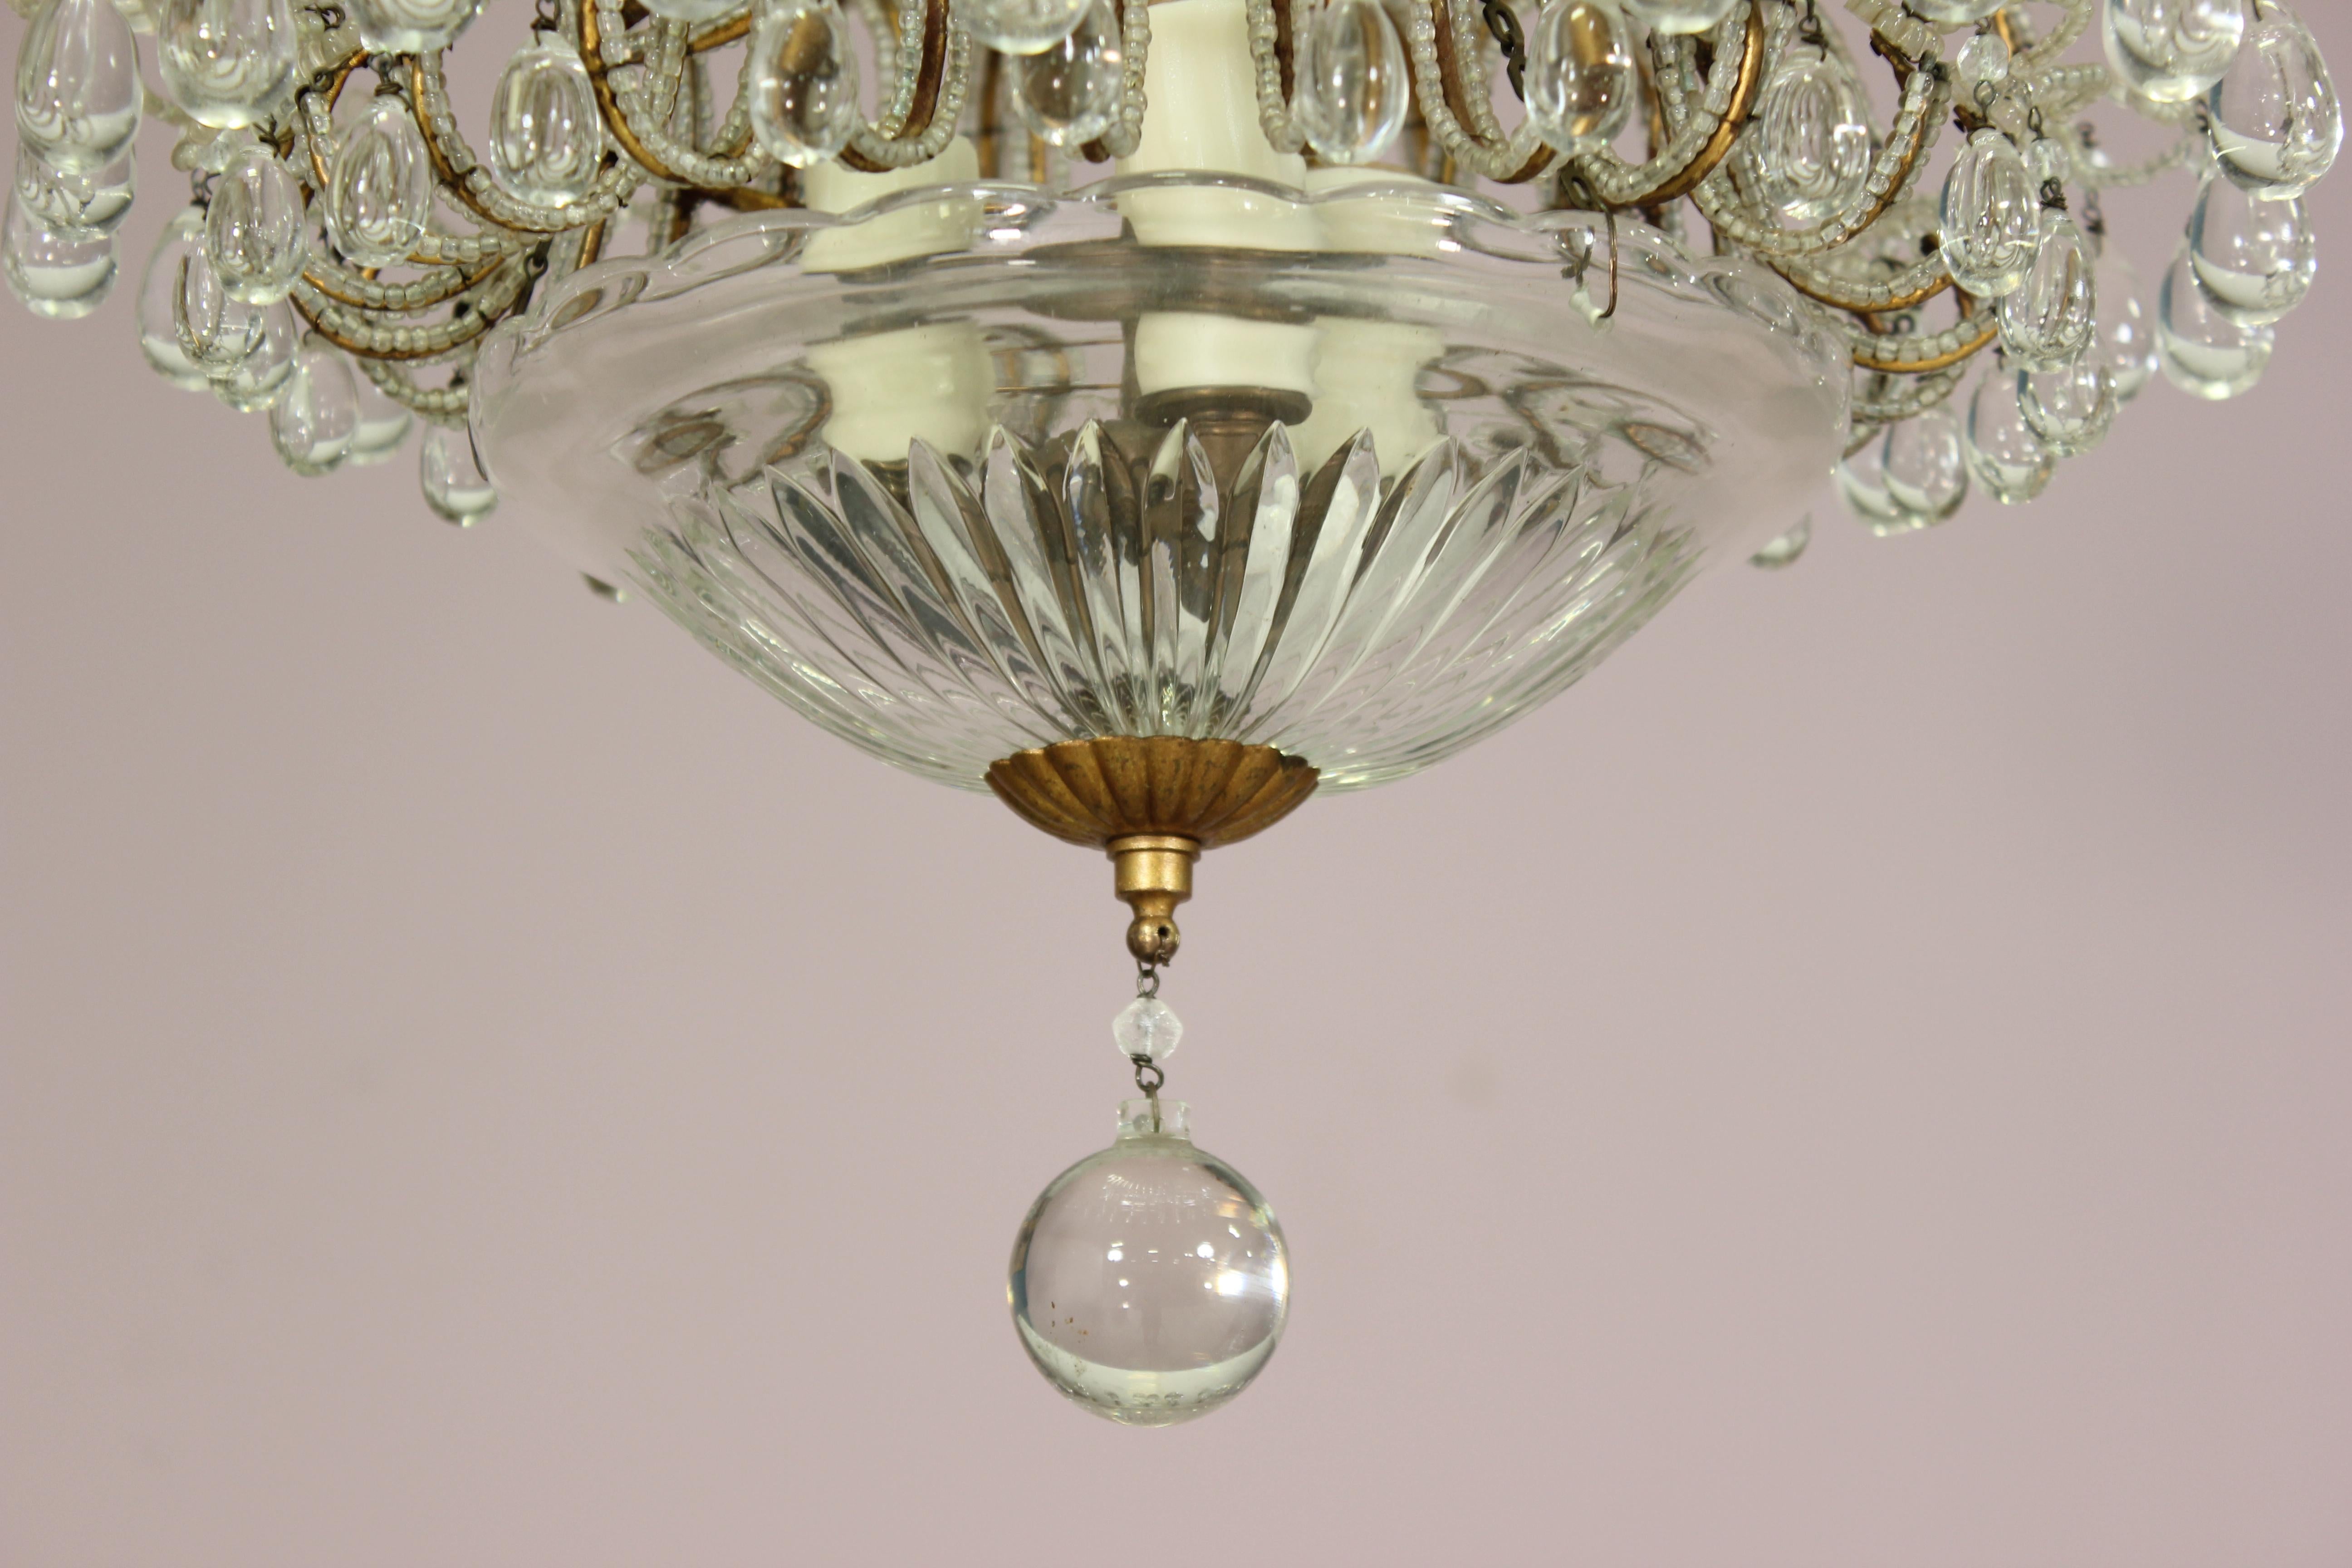 1940s Italian petite-scale crystal beaded chandelier with an etched glass dome shade which diffuses the light from the three candelabra bulbs at center. 

Perfect for a space in need of a little charm and radiance.

Wired and in working condition.